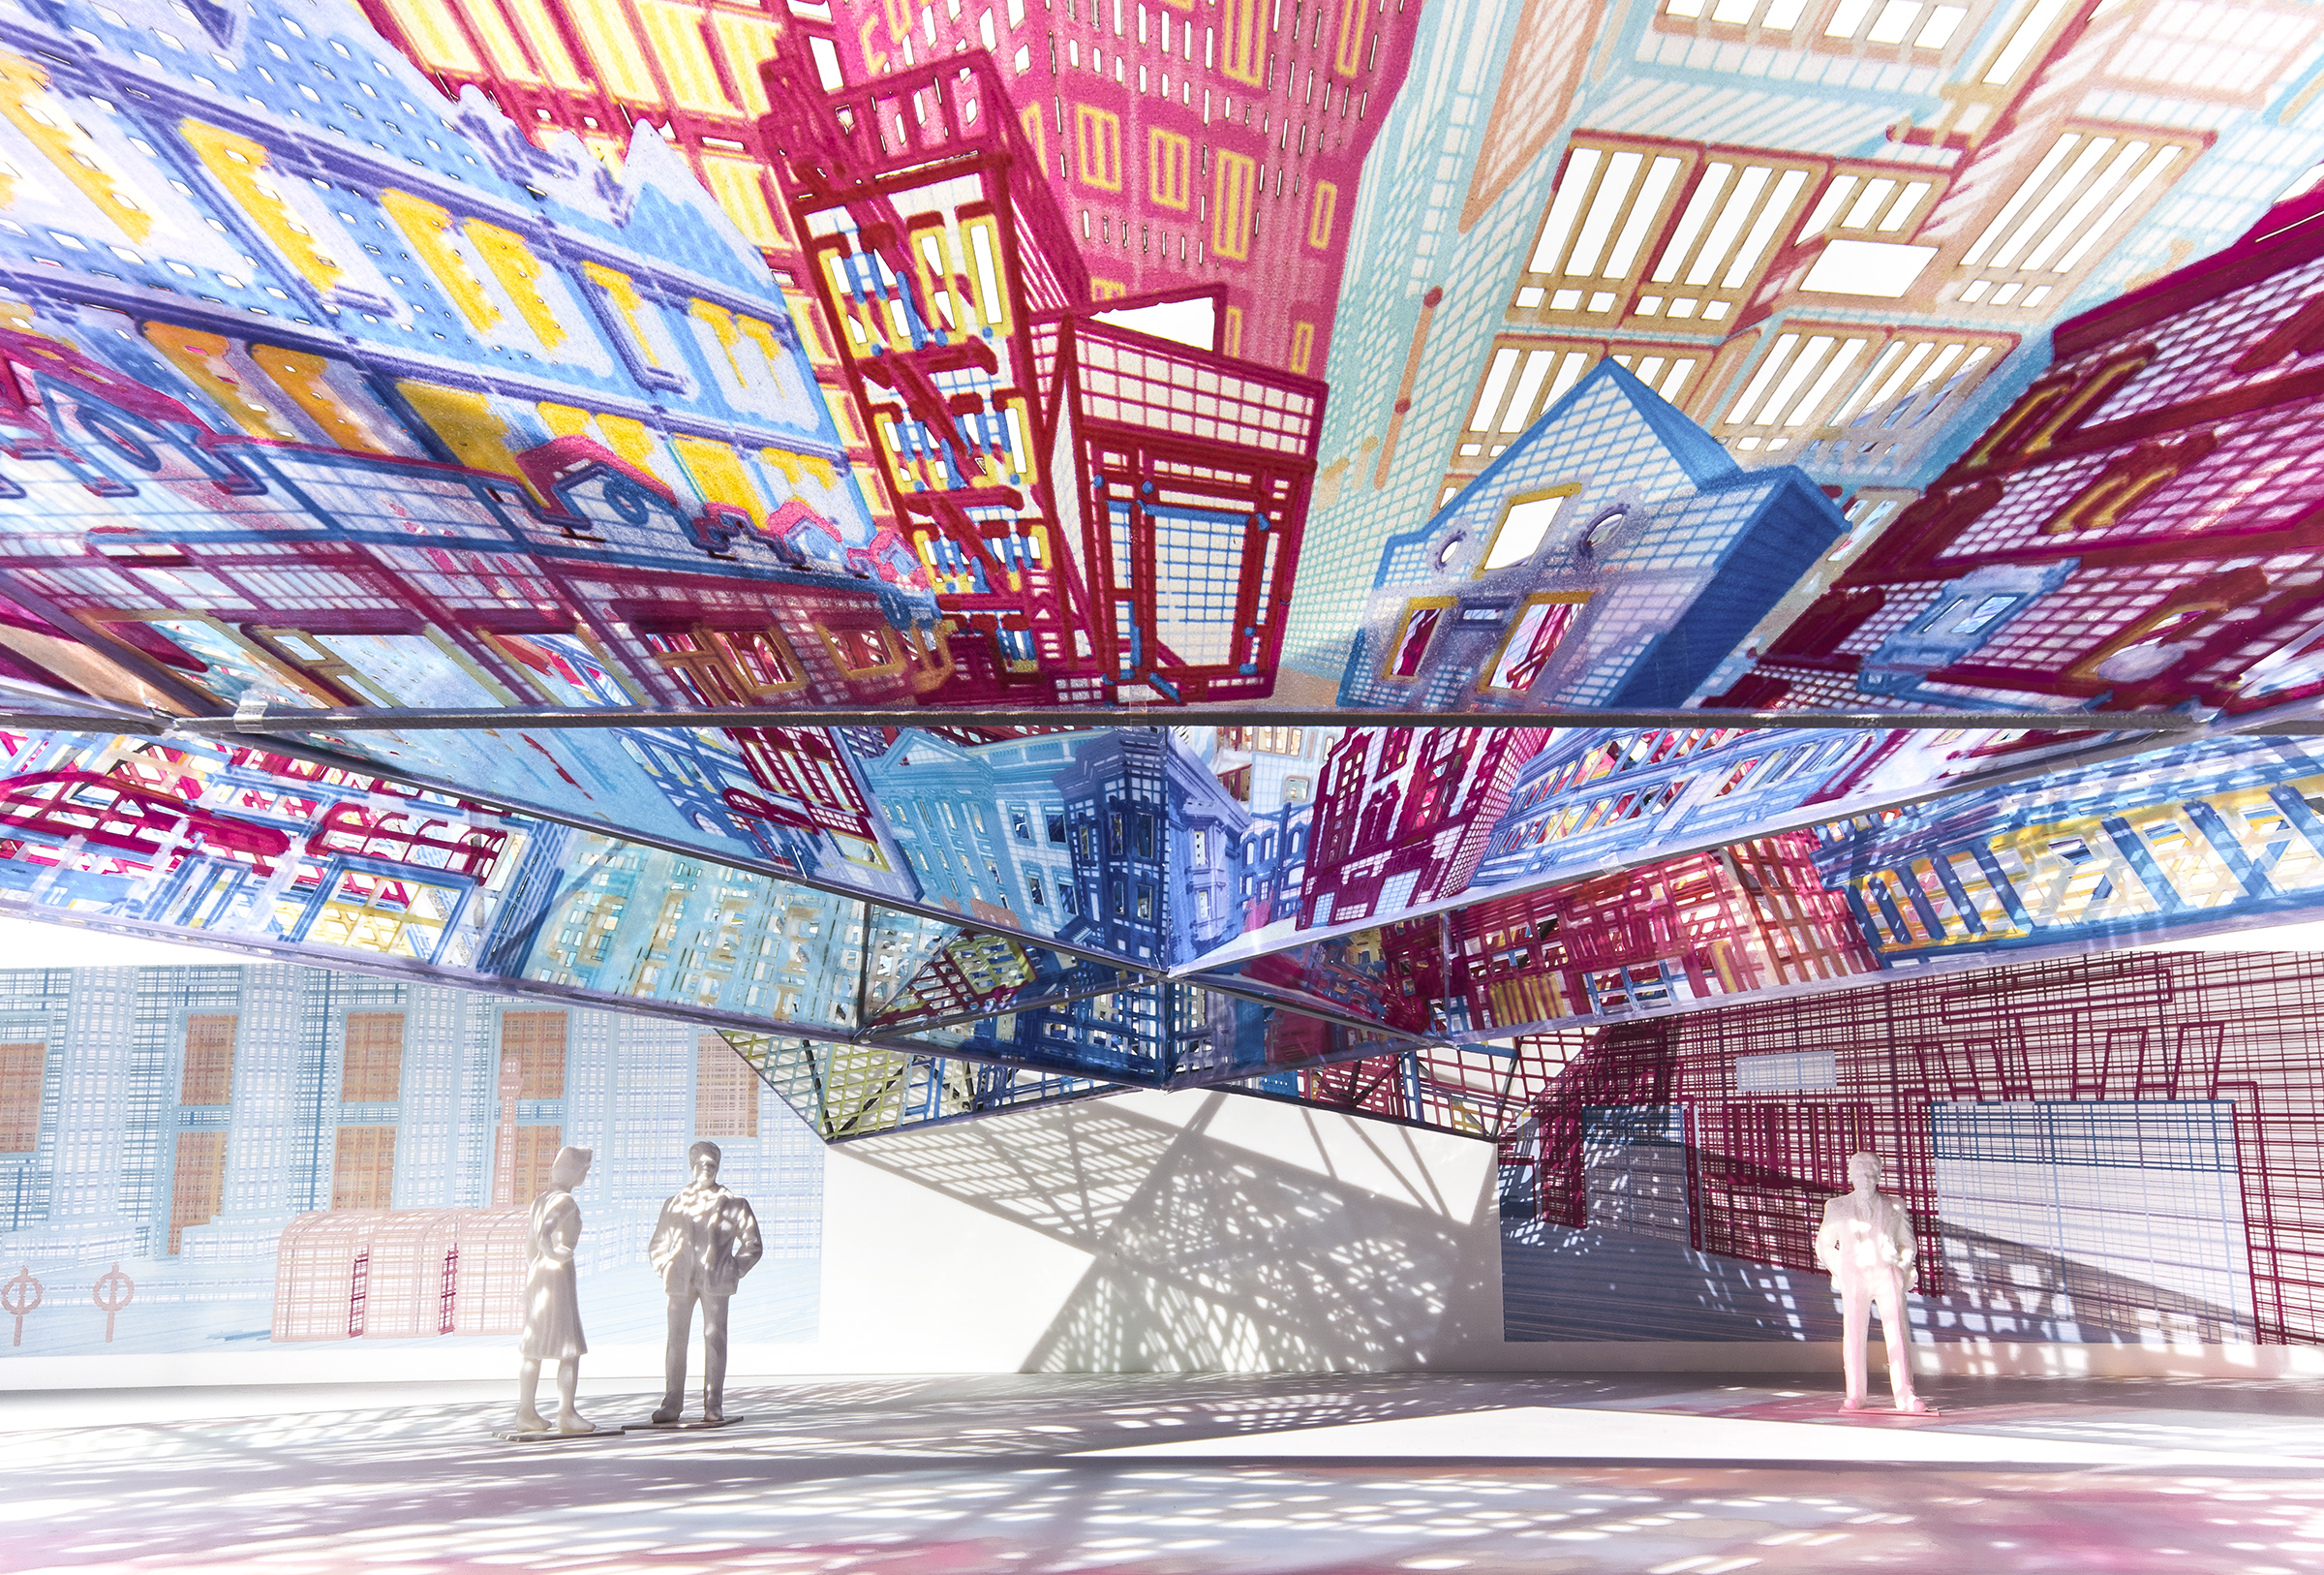 FreelandBuck installation for Moma PS1 competition